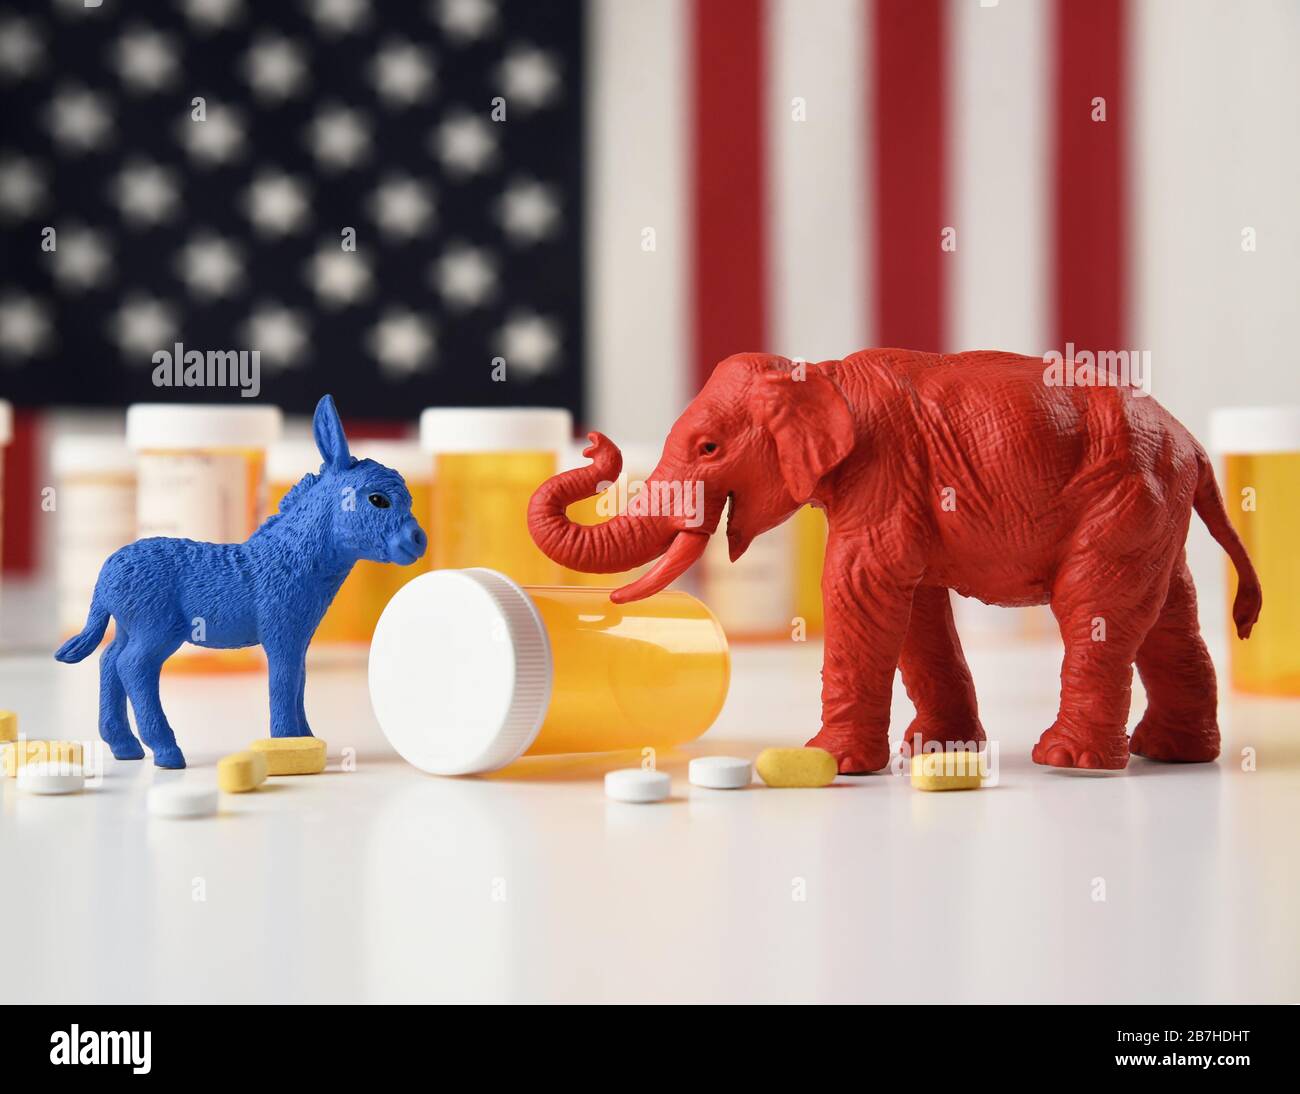 A blue donkey as a democrat and a red elephant as a republican are against an American flag with prescription pill bottles for a medical cost concept Stock Photo